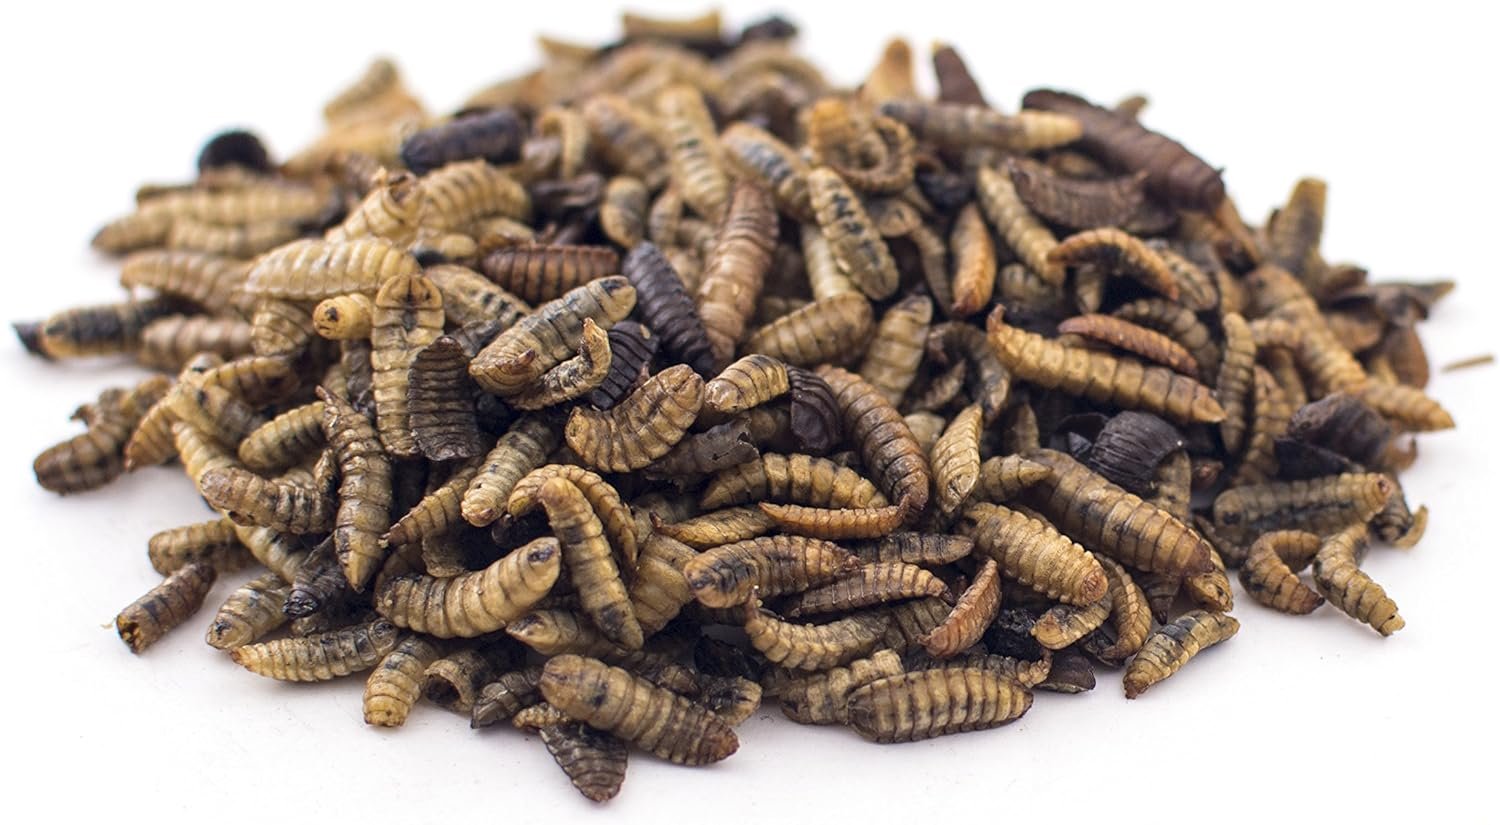 culinary coop chicken treats soldierworms review